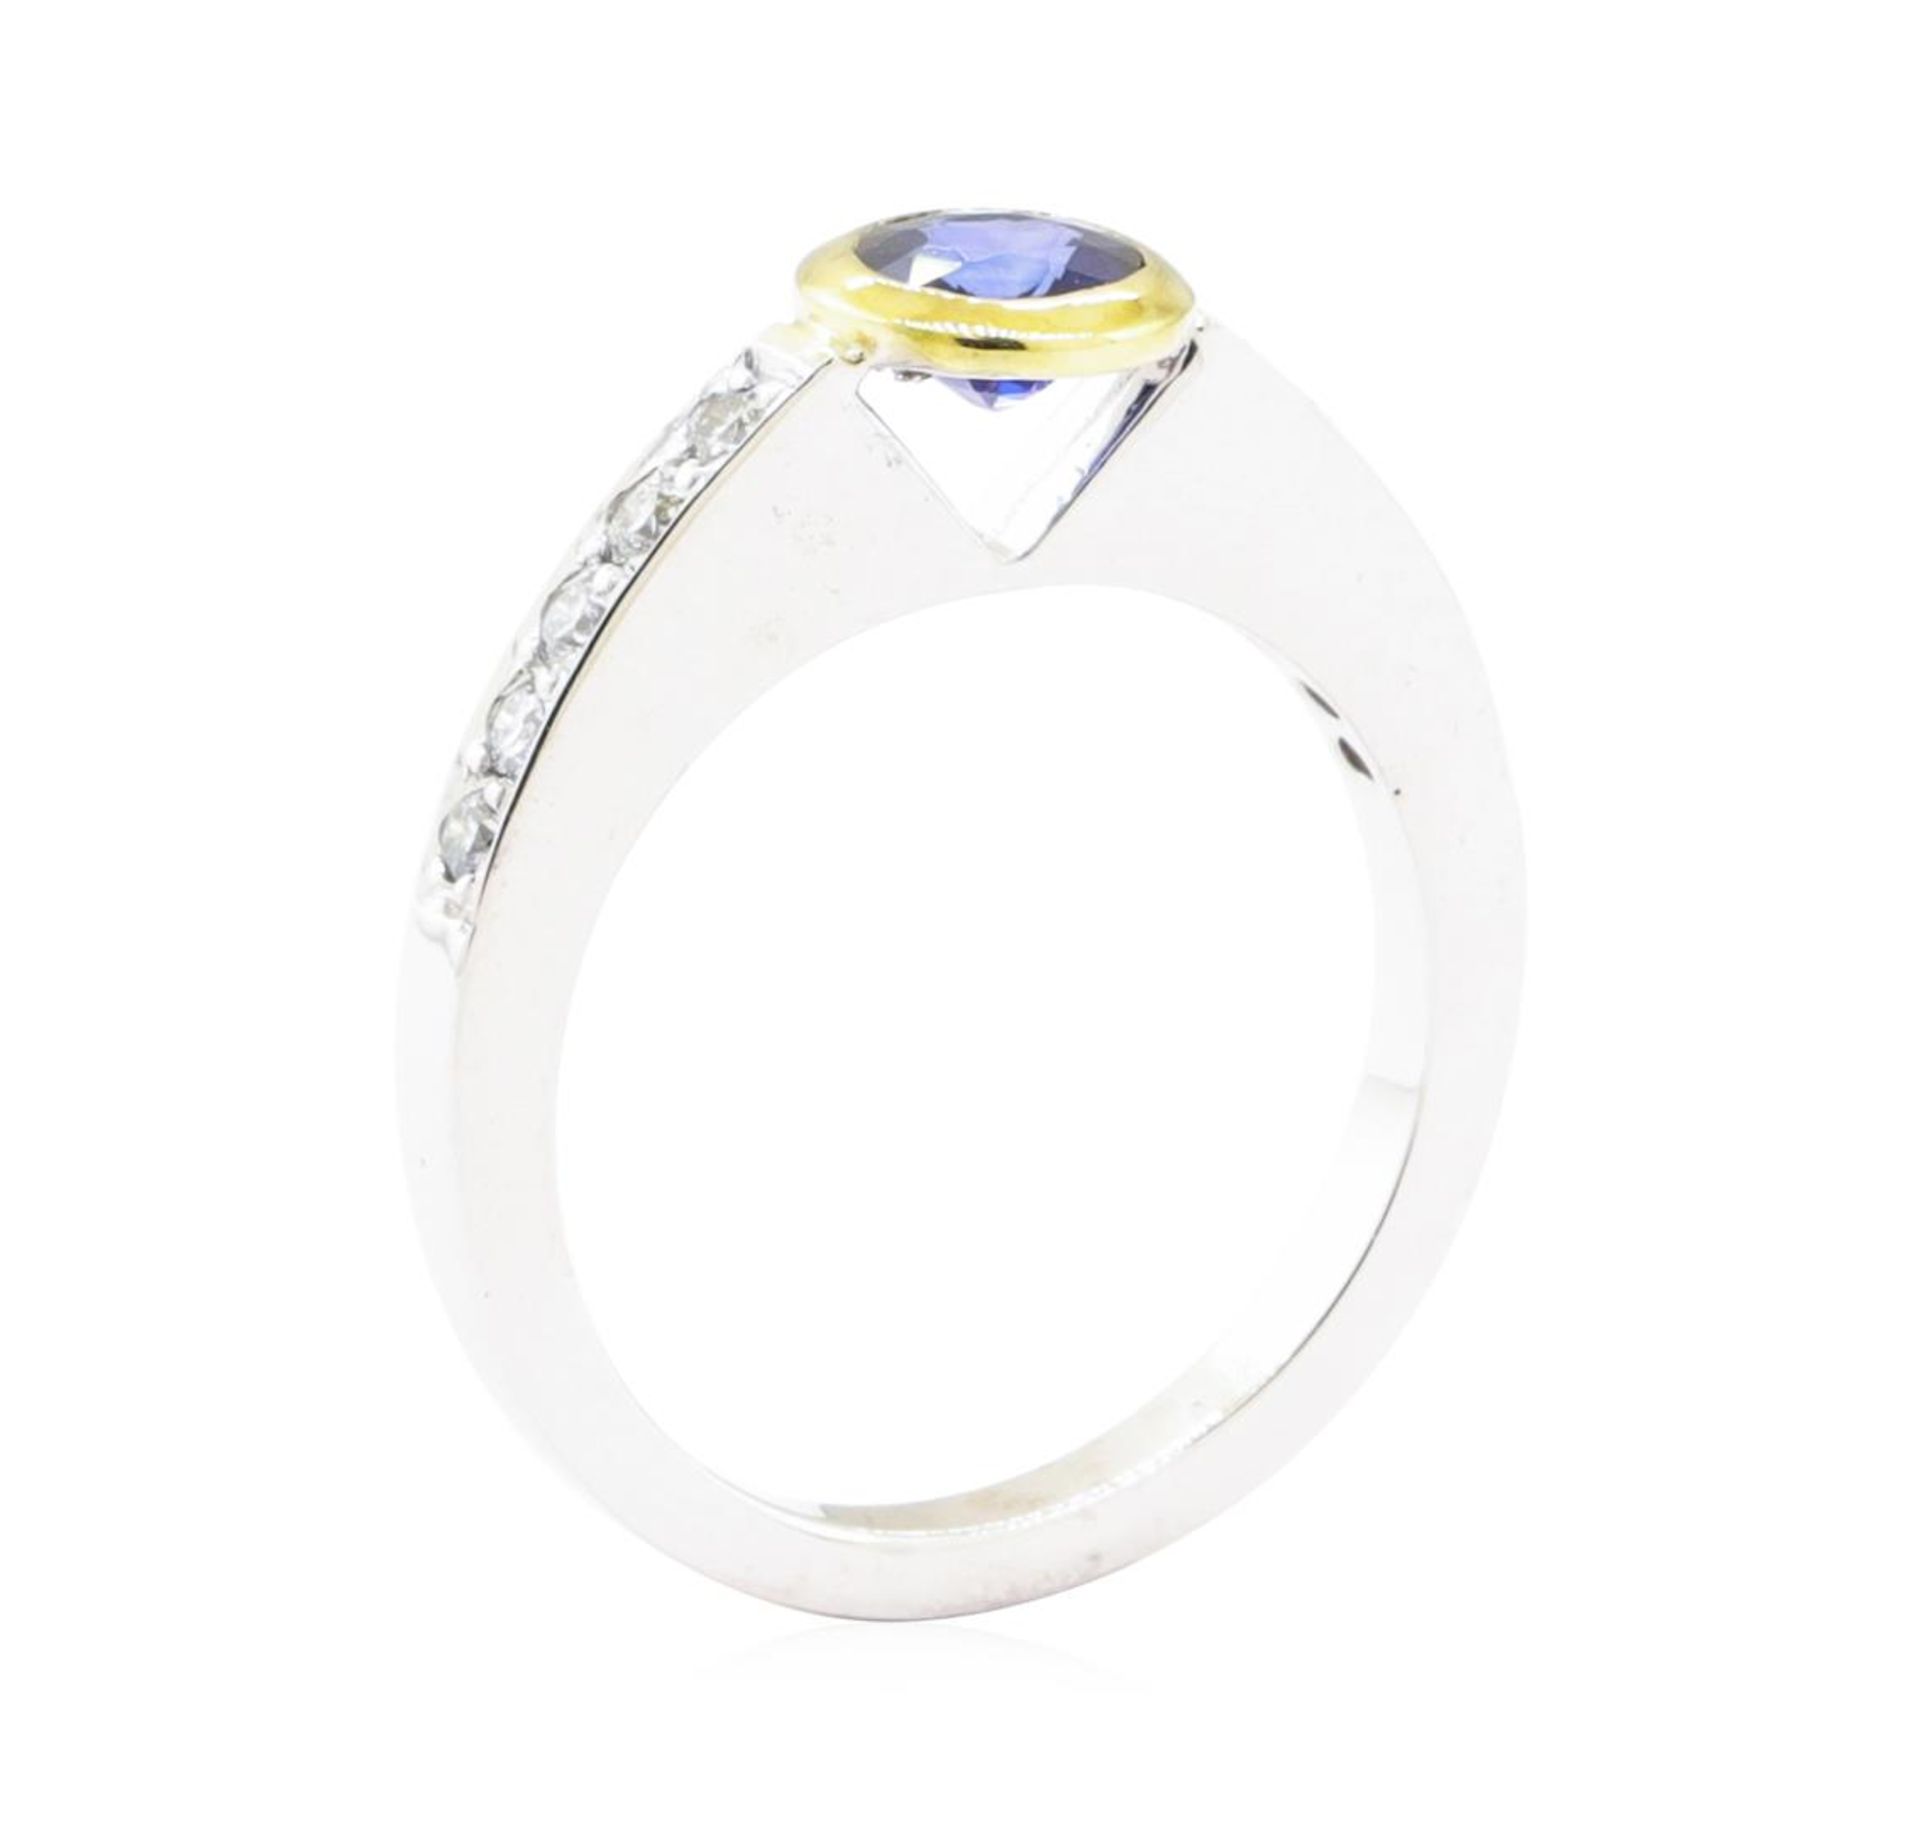 0.95ctw Sapphire and Diamond Ring - 18KT White and Yellow Gold - Image 4 of 4